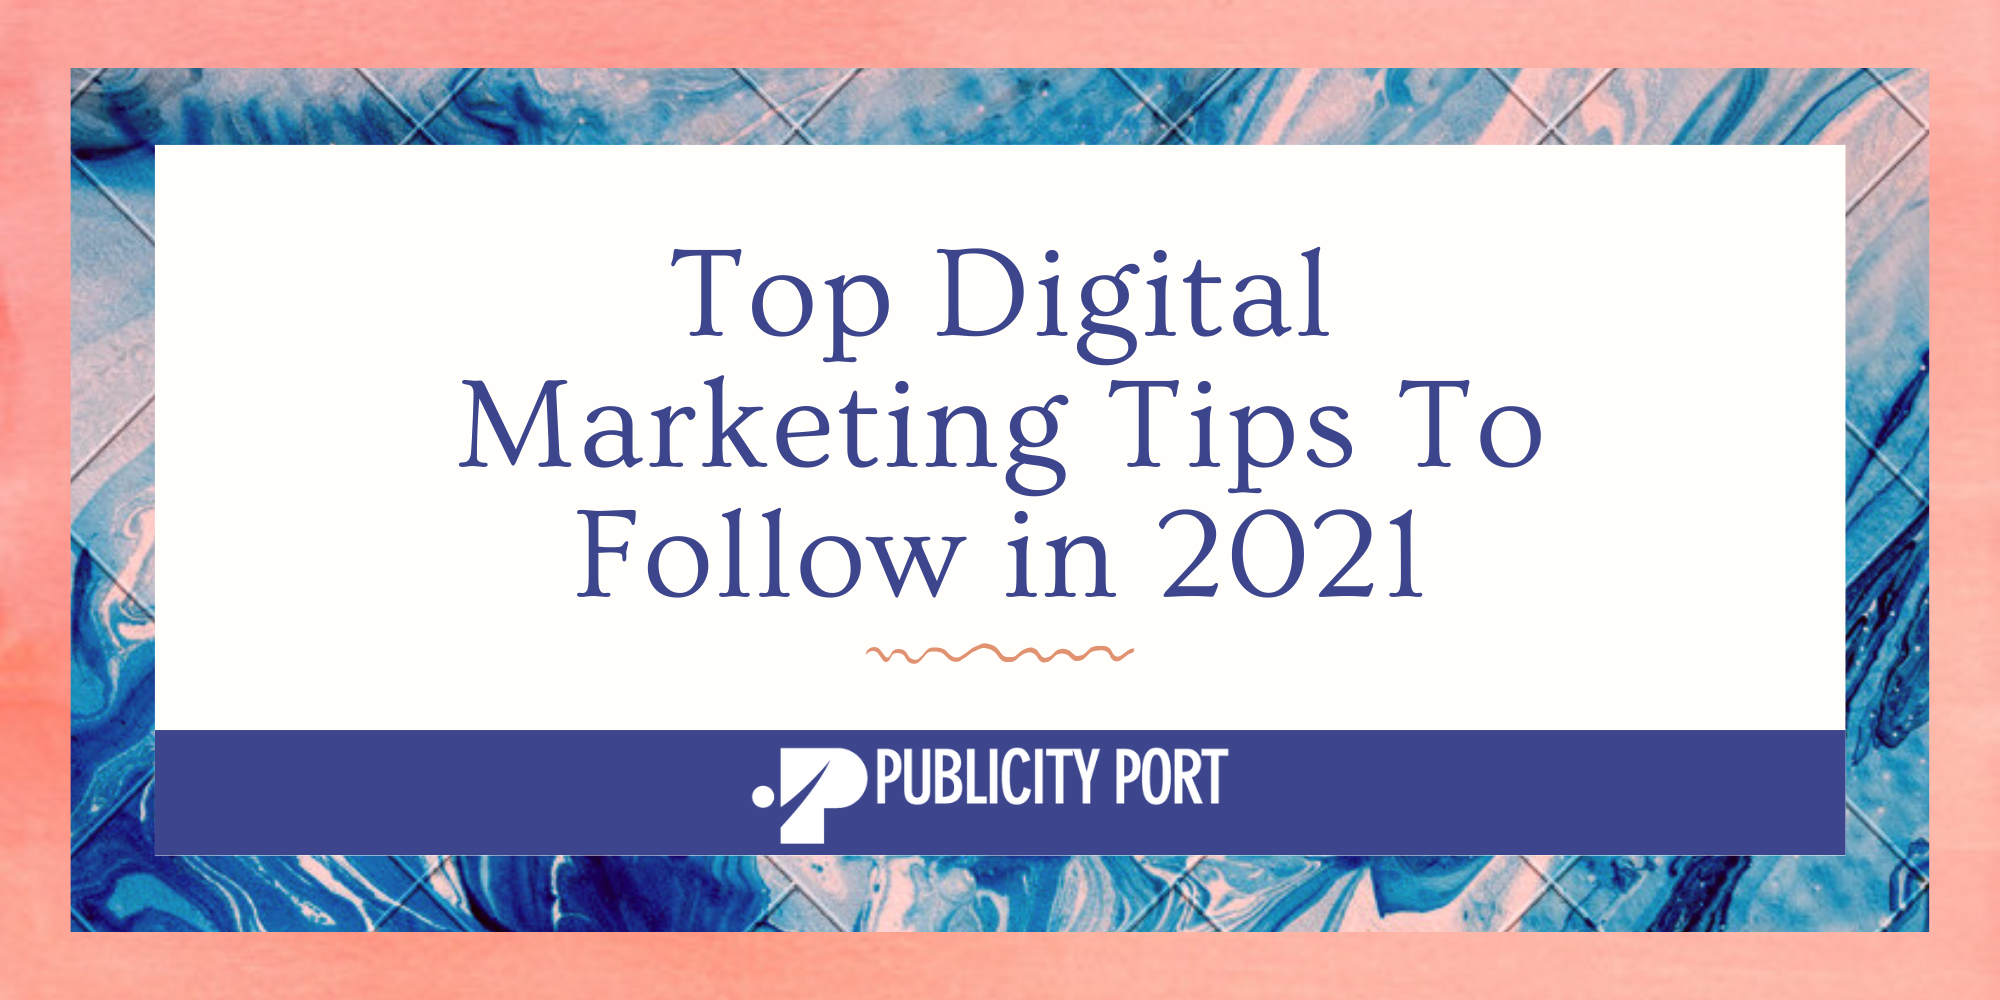 Top Digital Marketing tips to follow in 2021